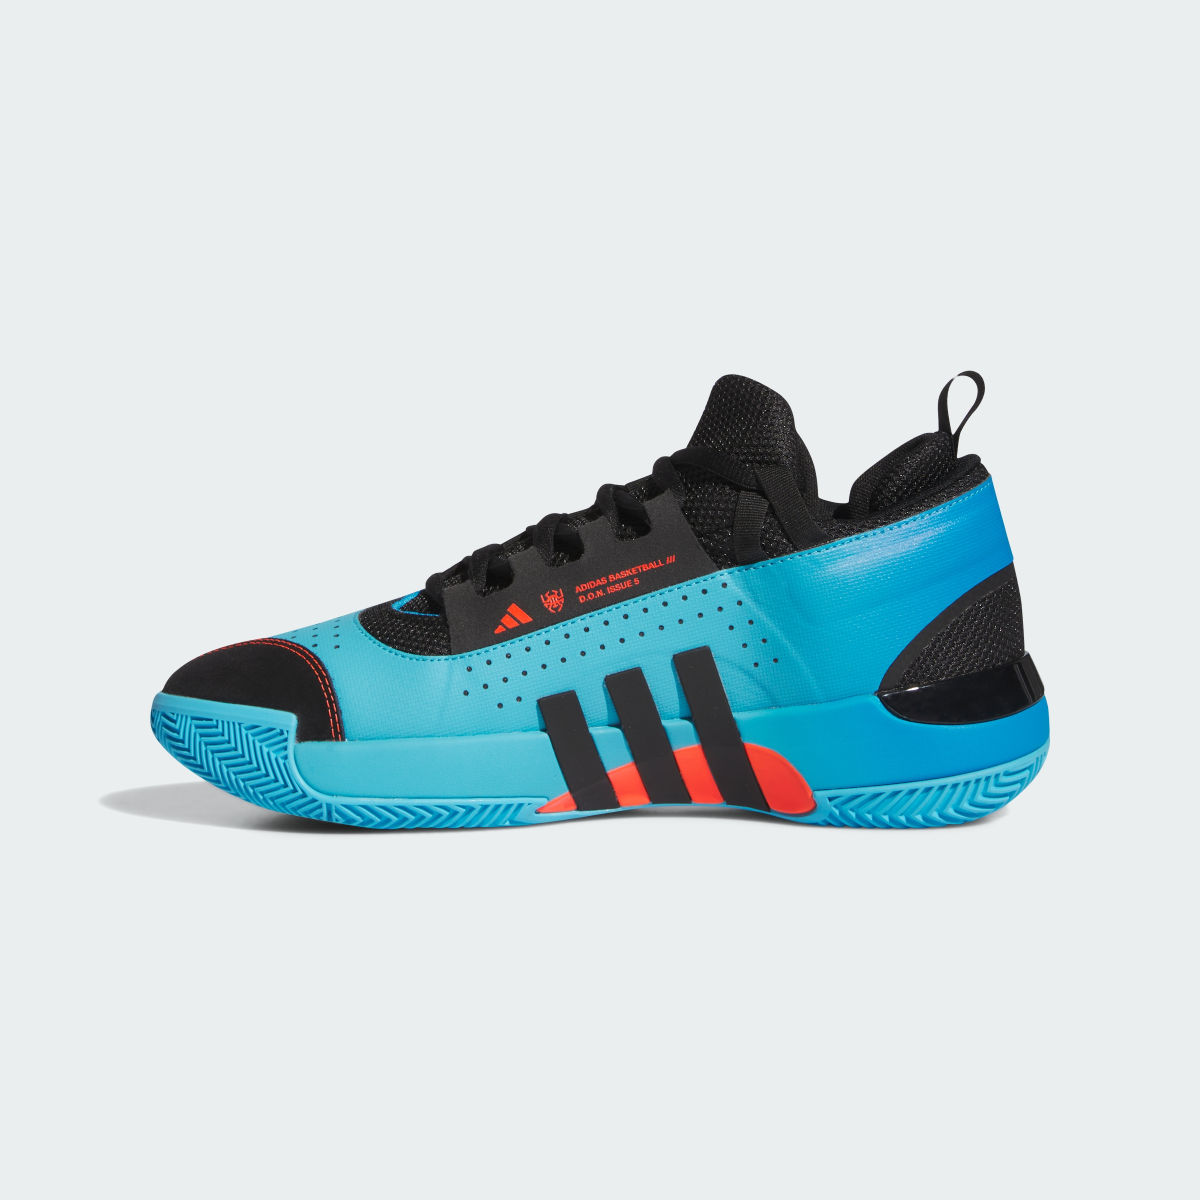 Adidas D.O.N. Issue 5 Shoes. 7